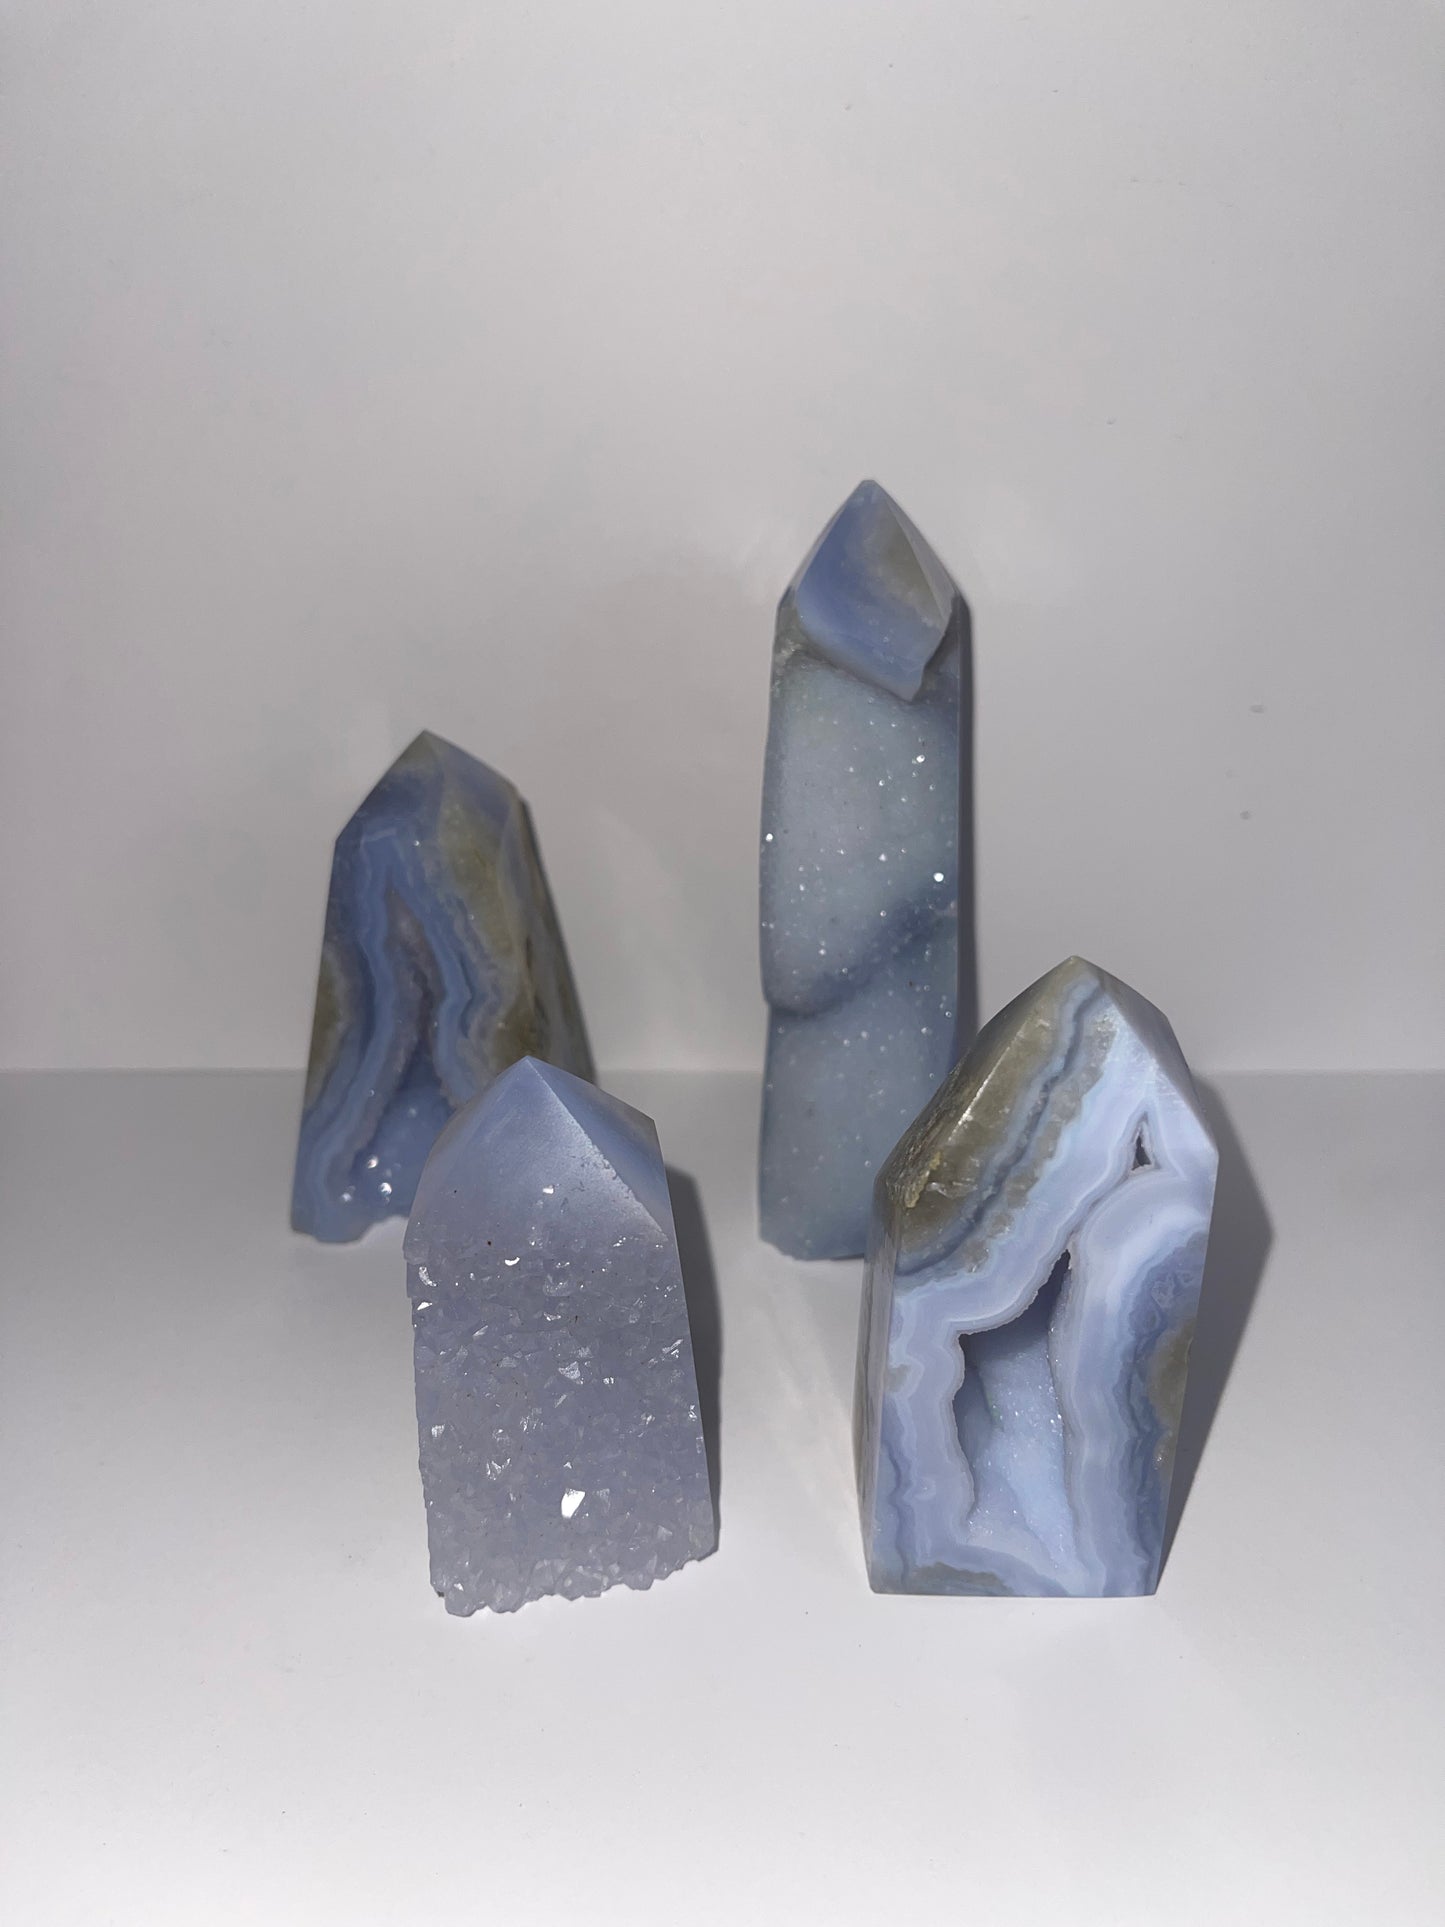 Druzy blue lace agate geode towers